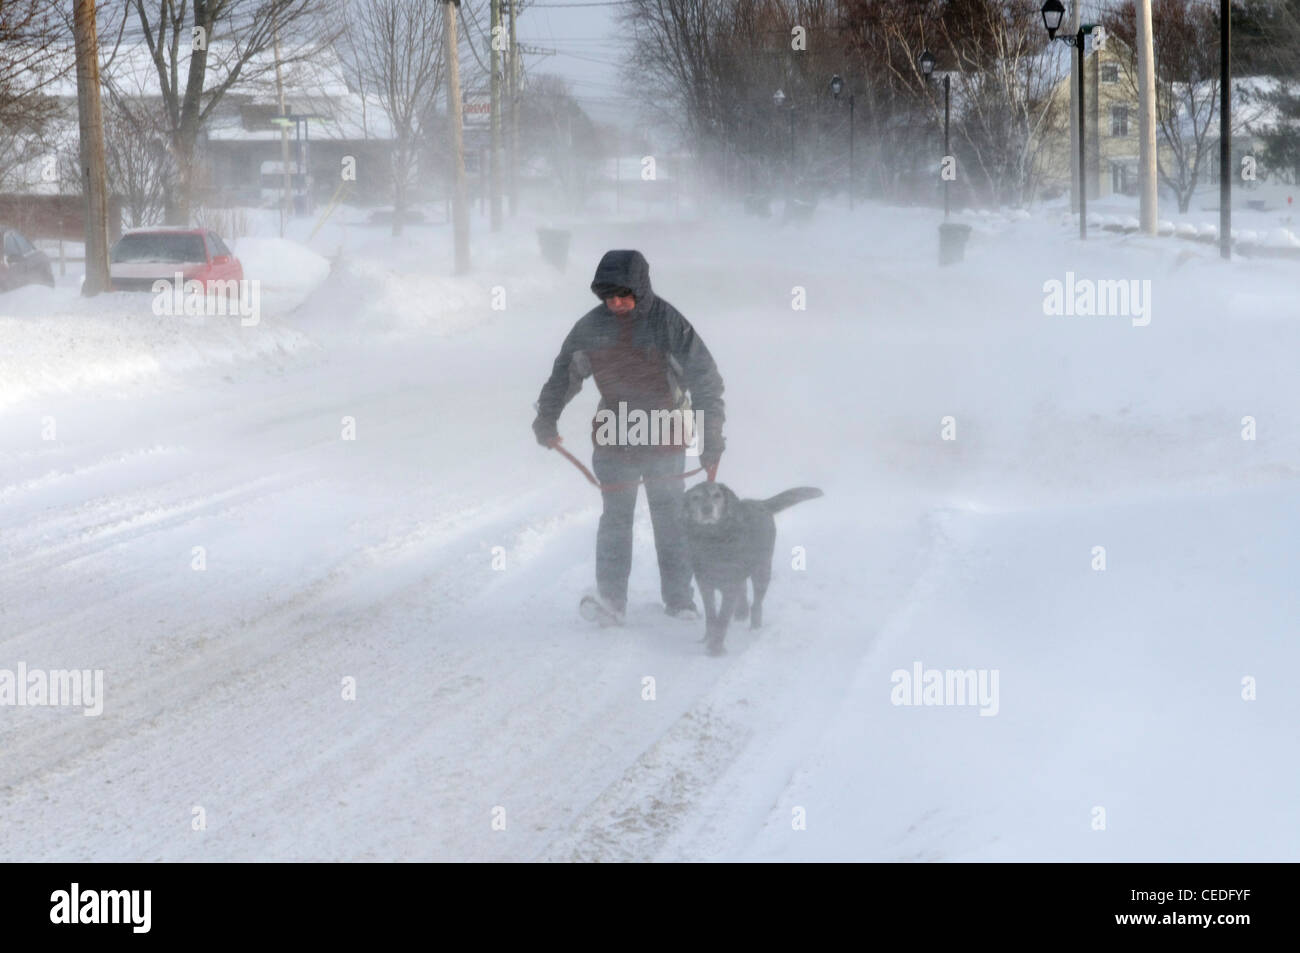 A man walking a dog in heavy blowing snow Stock Photo